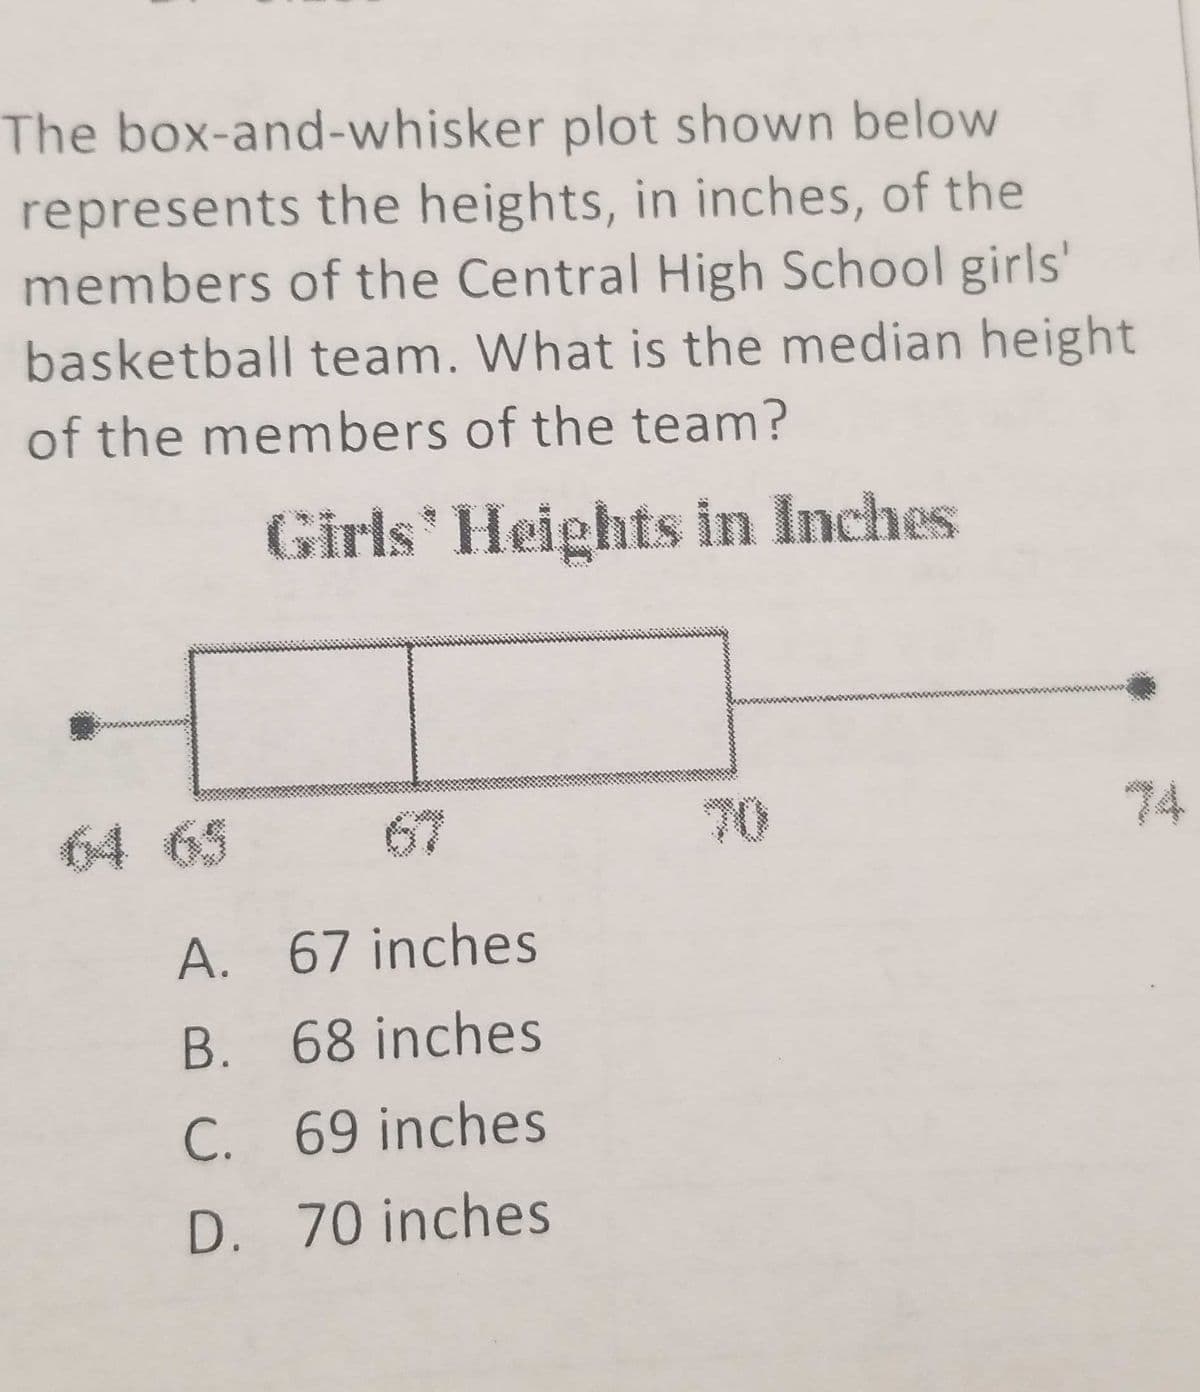 The box-and-whisker plot shown below
represents the heights, in inches, of the
members of the Central High School girls'
basketball team. What is the median height
of the members of the team?
Girls Heights in Inches
64 65
67
70
74
A. 67 inches
B. 68 inches
C. 69 inches
D. 70 inches
